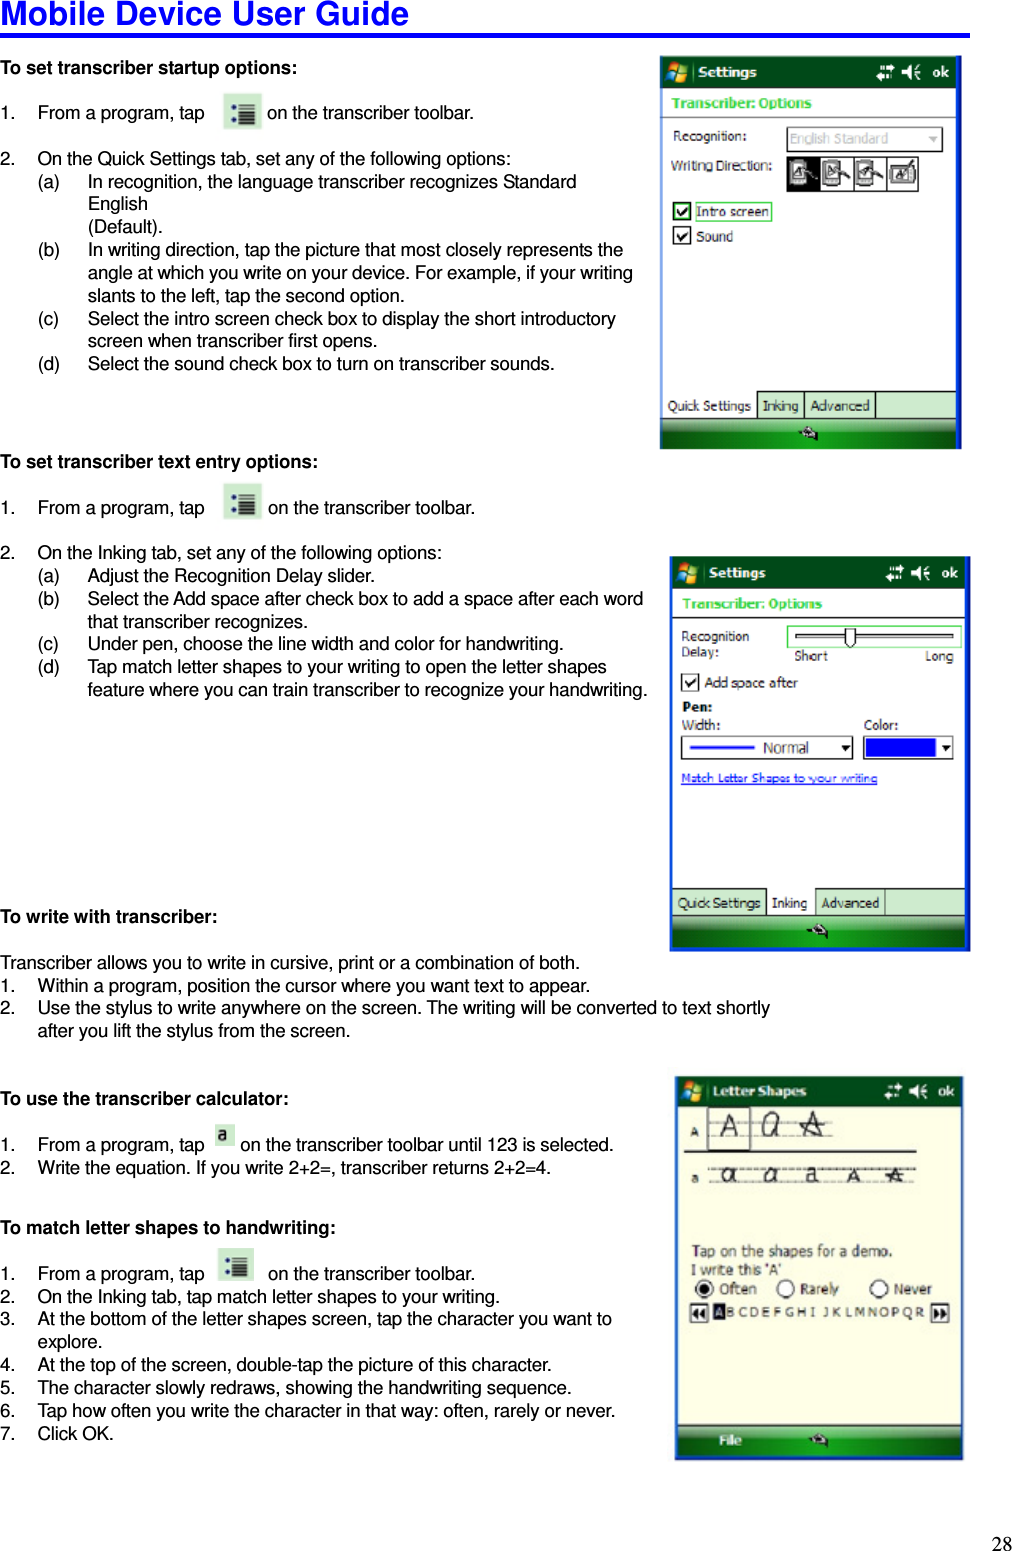 Mobile Device User Guide                                                                                                                                                                                                                                                                                                                                                                                                                                                                                                                                         28 To set transcriber startup options:    1.  From a program, tap              on the transcriber toolbar.    2.  On the Quick Settings tab, set any of the following options:   (a)  In recognition, the language transcriber recognizes Standard English       (Default).   (b)  In writing direction, tap the picture that most closely represents the angle at which you write on your device. For example, if your writing slants to the left, tap the second option.   (c)  Select the intro screen check box to display the short introductory screen when transcriber first opens.   (d)  Select the sound check box to turn on transcriber sounds.      To set transcriber text entry options:    1.  From a program, tap        on the transcriber toolbar.    2.  On the Inking tab, set any of the following options:   (a)  Adjust the Recognition Delay slider.   (b)  Select the Add space after check box to add a space after each word that transcriber recognizes.   (c)  Under pen, choose the line width and color for handwriting.   (d)  Tap match letter shapes to your writing to open the letter shapes feature where you can train transcriber to recognize your handwriting.            To write with transcriber:    Transcriber allows you to write in cursive, print or a combination of both.   1.  Within a program, position the cursor where you want text to appear.   2.  Use the stylus to write anywhere on the screen. The writing will be converted to text shortly     after you lift the stylus from the screen.     To use the transcriber calculator:    1.  From a program, tap        on the transcriber toolbar until 123 is selected.   2.  Write the equation. If you write 2+2=, transcriber returns 2+2=4.    To match letter shapes to handwriting:    1.  From a program, tap        on the transcriber toolbar. 2.  On the Inking tab, tap match letter shapes to your writing.   3.  At the bottom of the letter shapes screen, tap the character you want to explore.   4.  At the top of the screen, double-tap the picture of this character.   5.  The character slowly redraws, showing the handwriting sequence.   6.  Tap how often you write the character in that way: often, rarely or never.   7.  Click OK.   